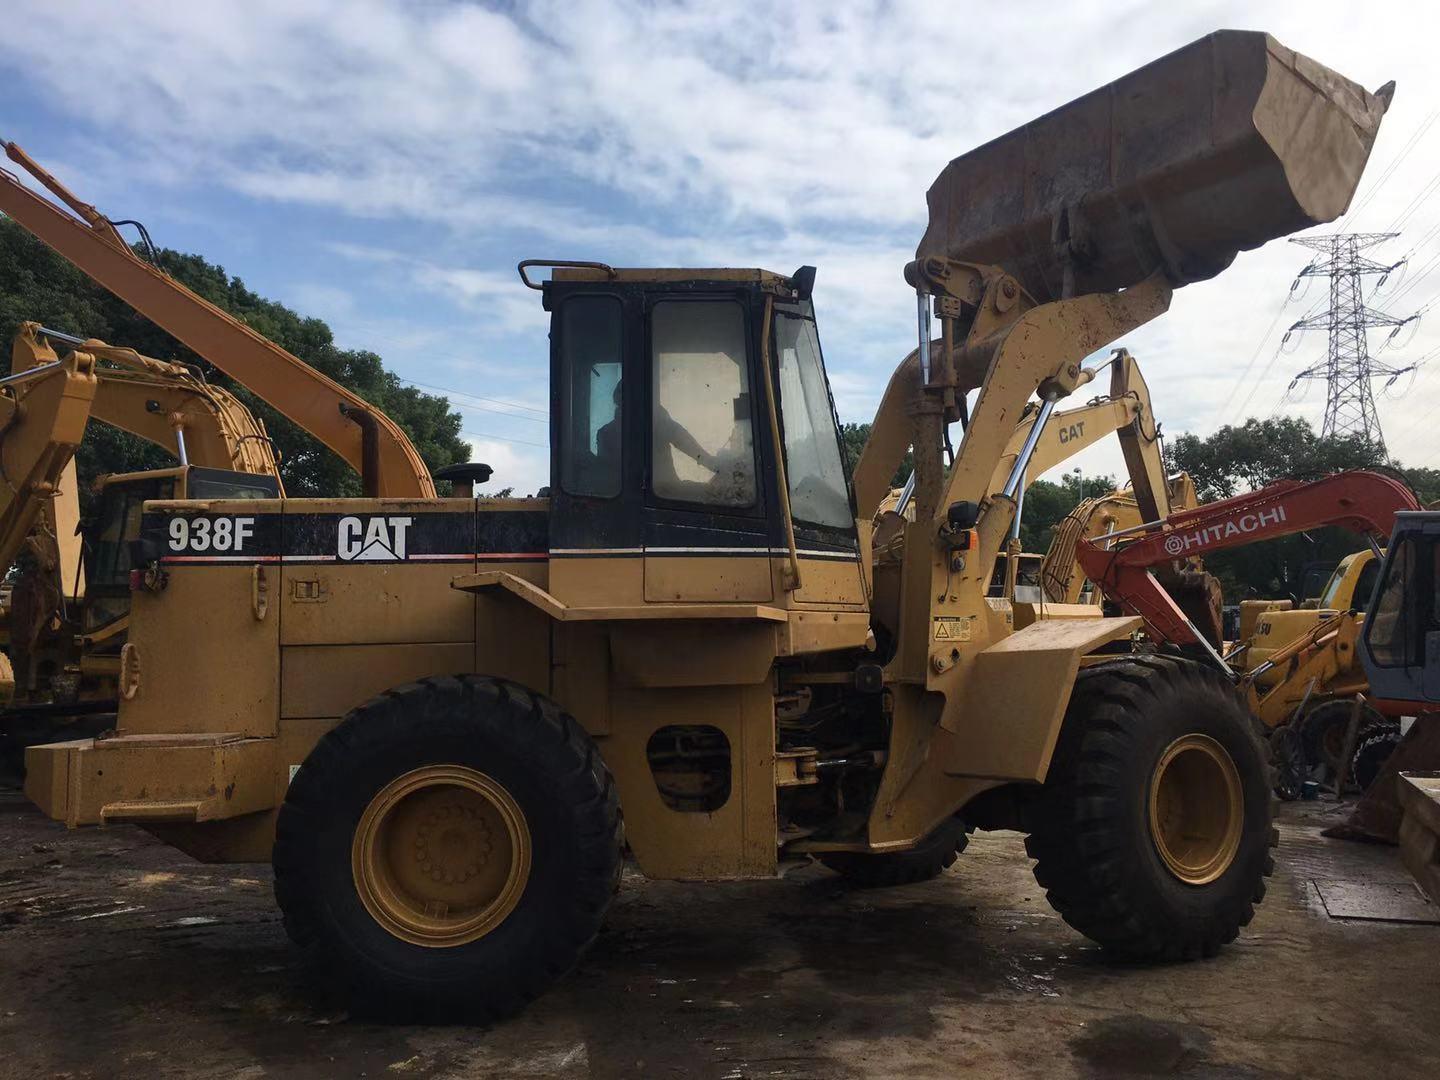 Used Caterpillar 938f Loader with High Quality in Low Price